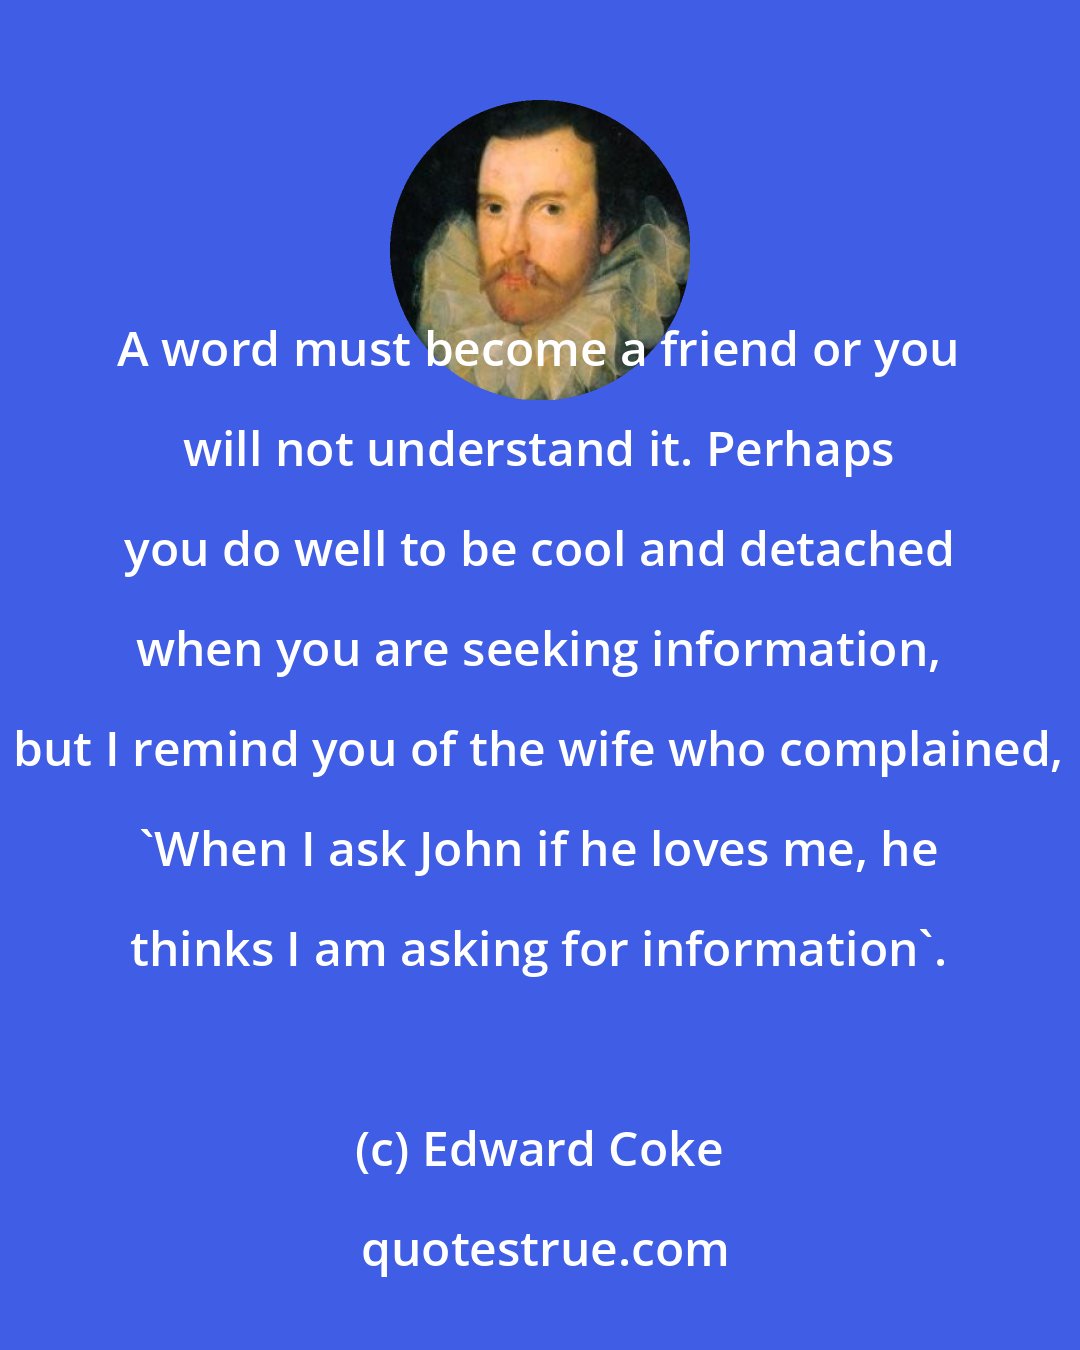 Edward Coke: A word must become a friend or you will not understand it. Perhaps you do well to be cool and detached when you are seeking information, but I remind you of the wife who complained, 'When I ask John if he loves me, he thinks I am asking for information'.